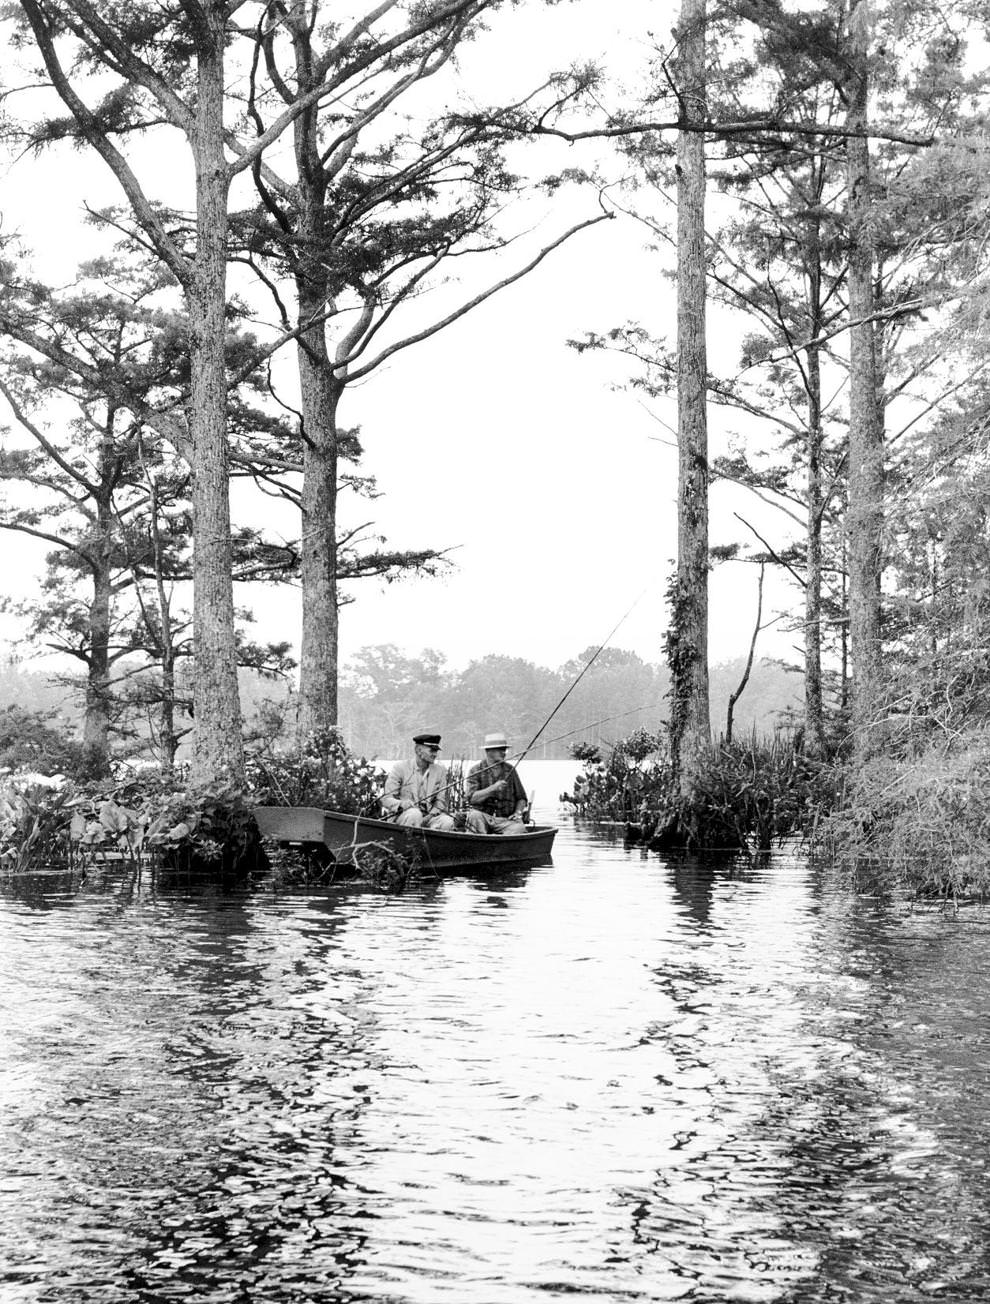 Two men fished for bluegills in Chickahominy Lake, a large water supply reservoir along the New Kent-Charles City county line, 1961.